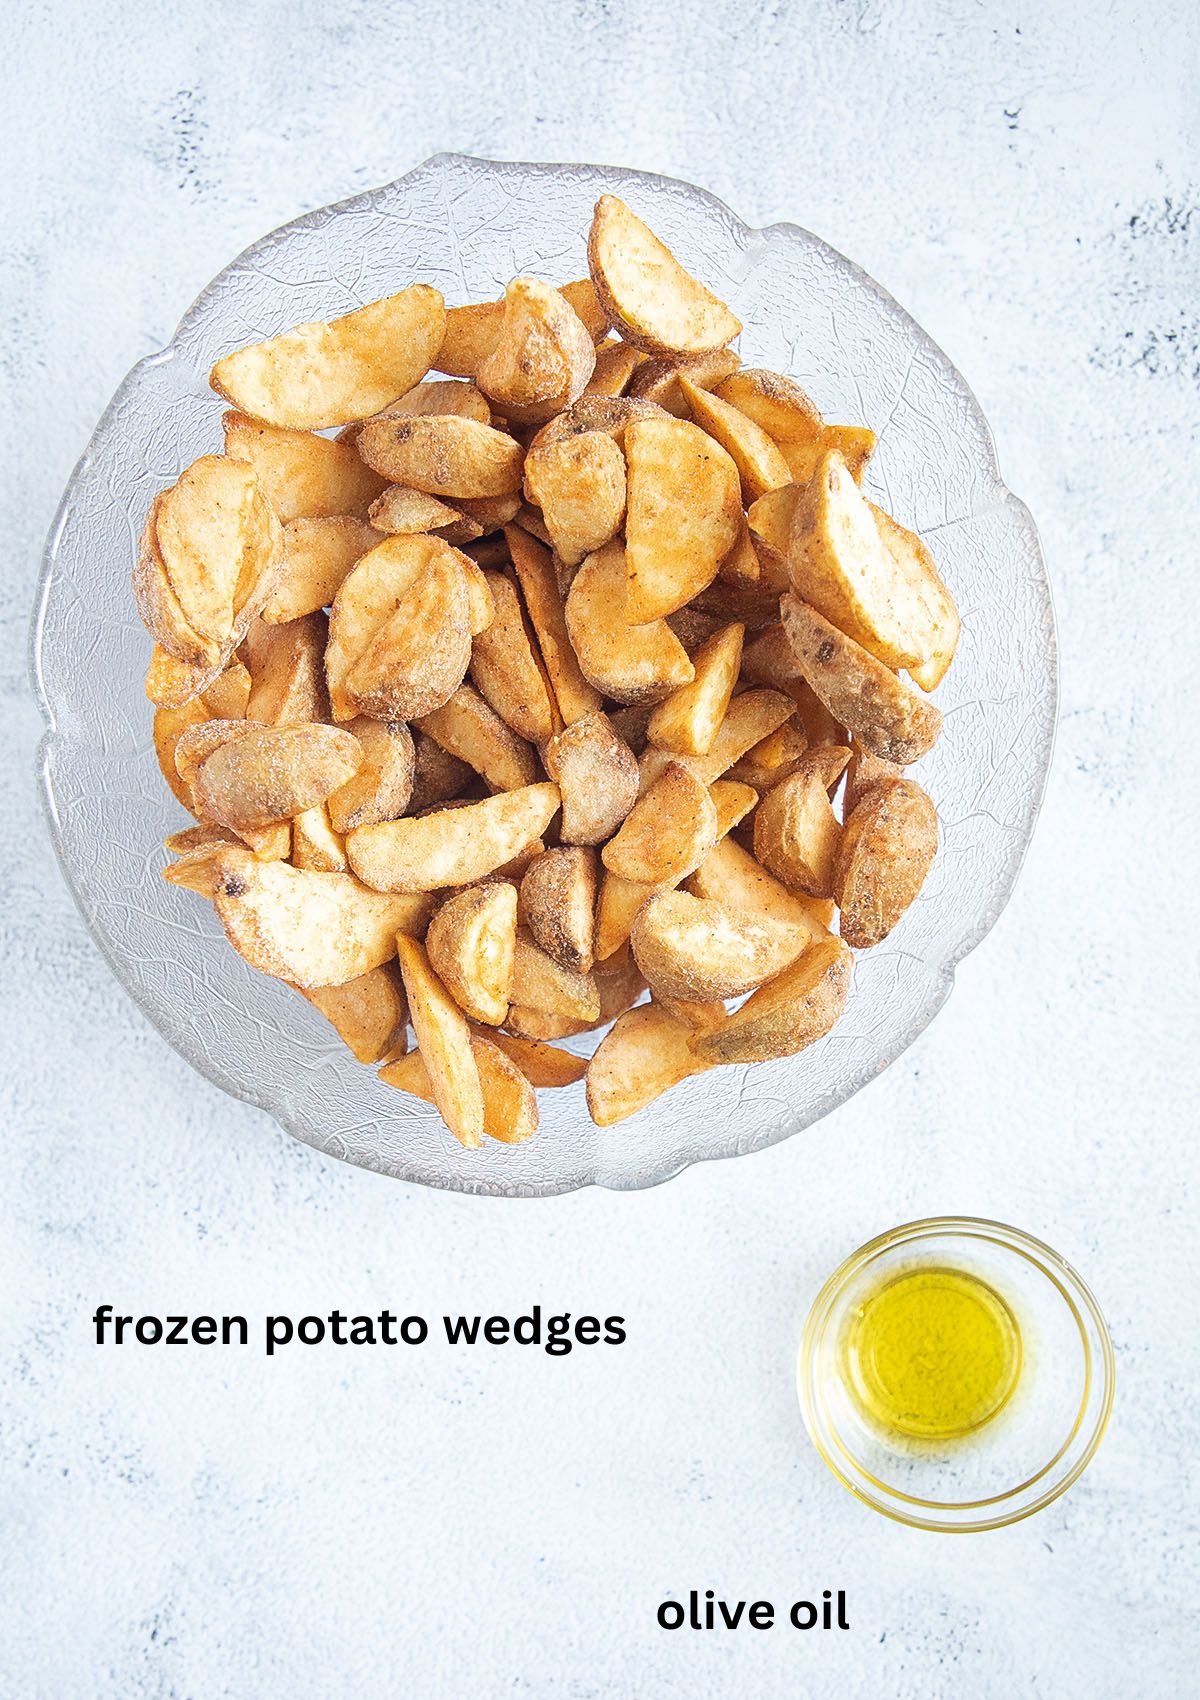 a bowl of uncooked frozen potato wedges and a small bowl with olive oil.